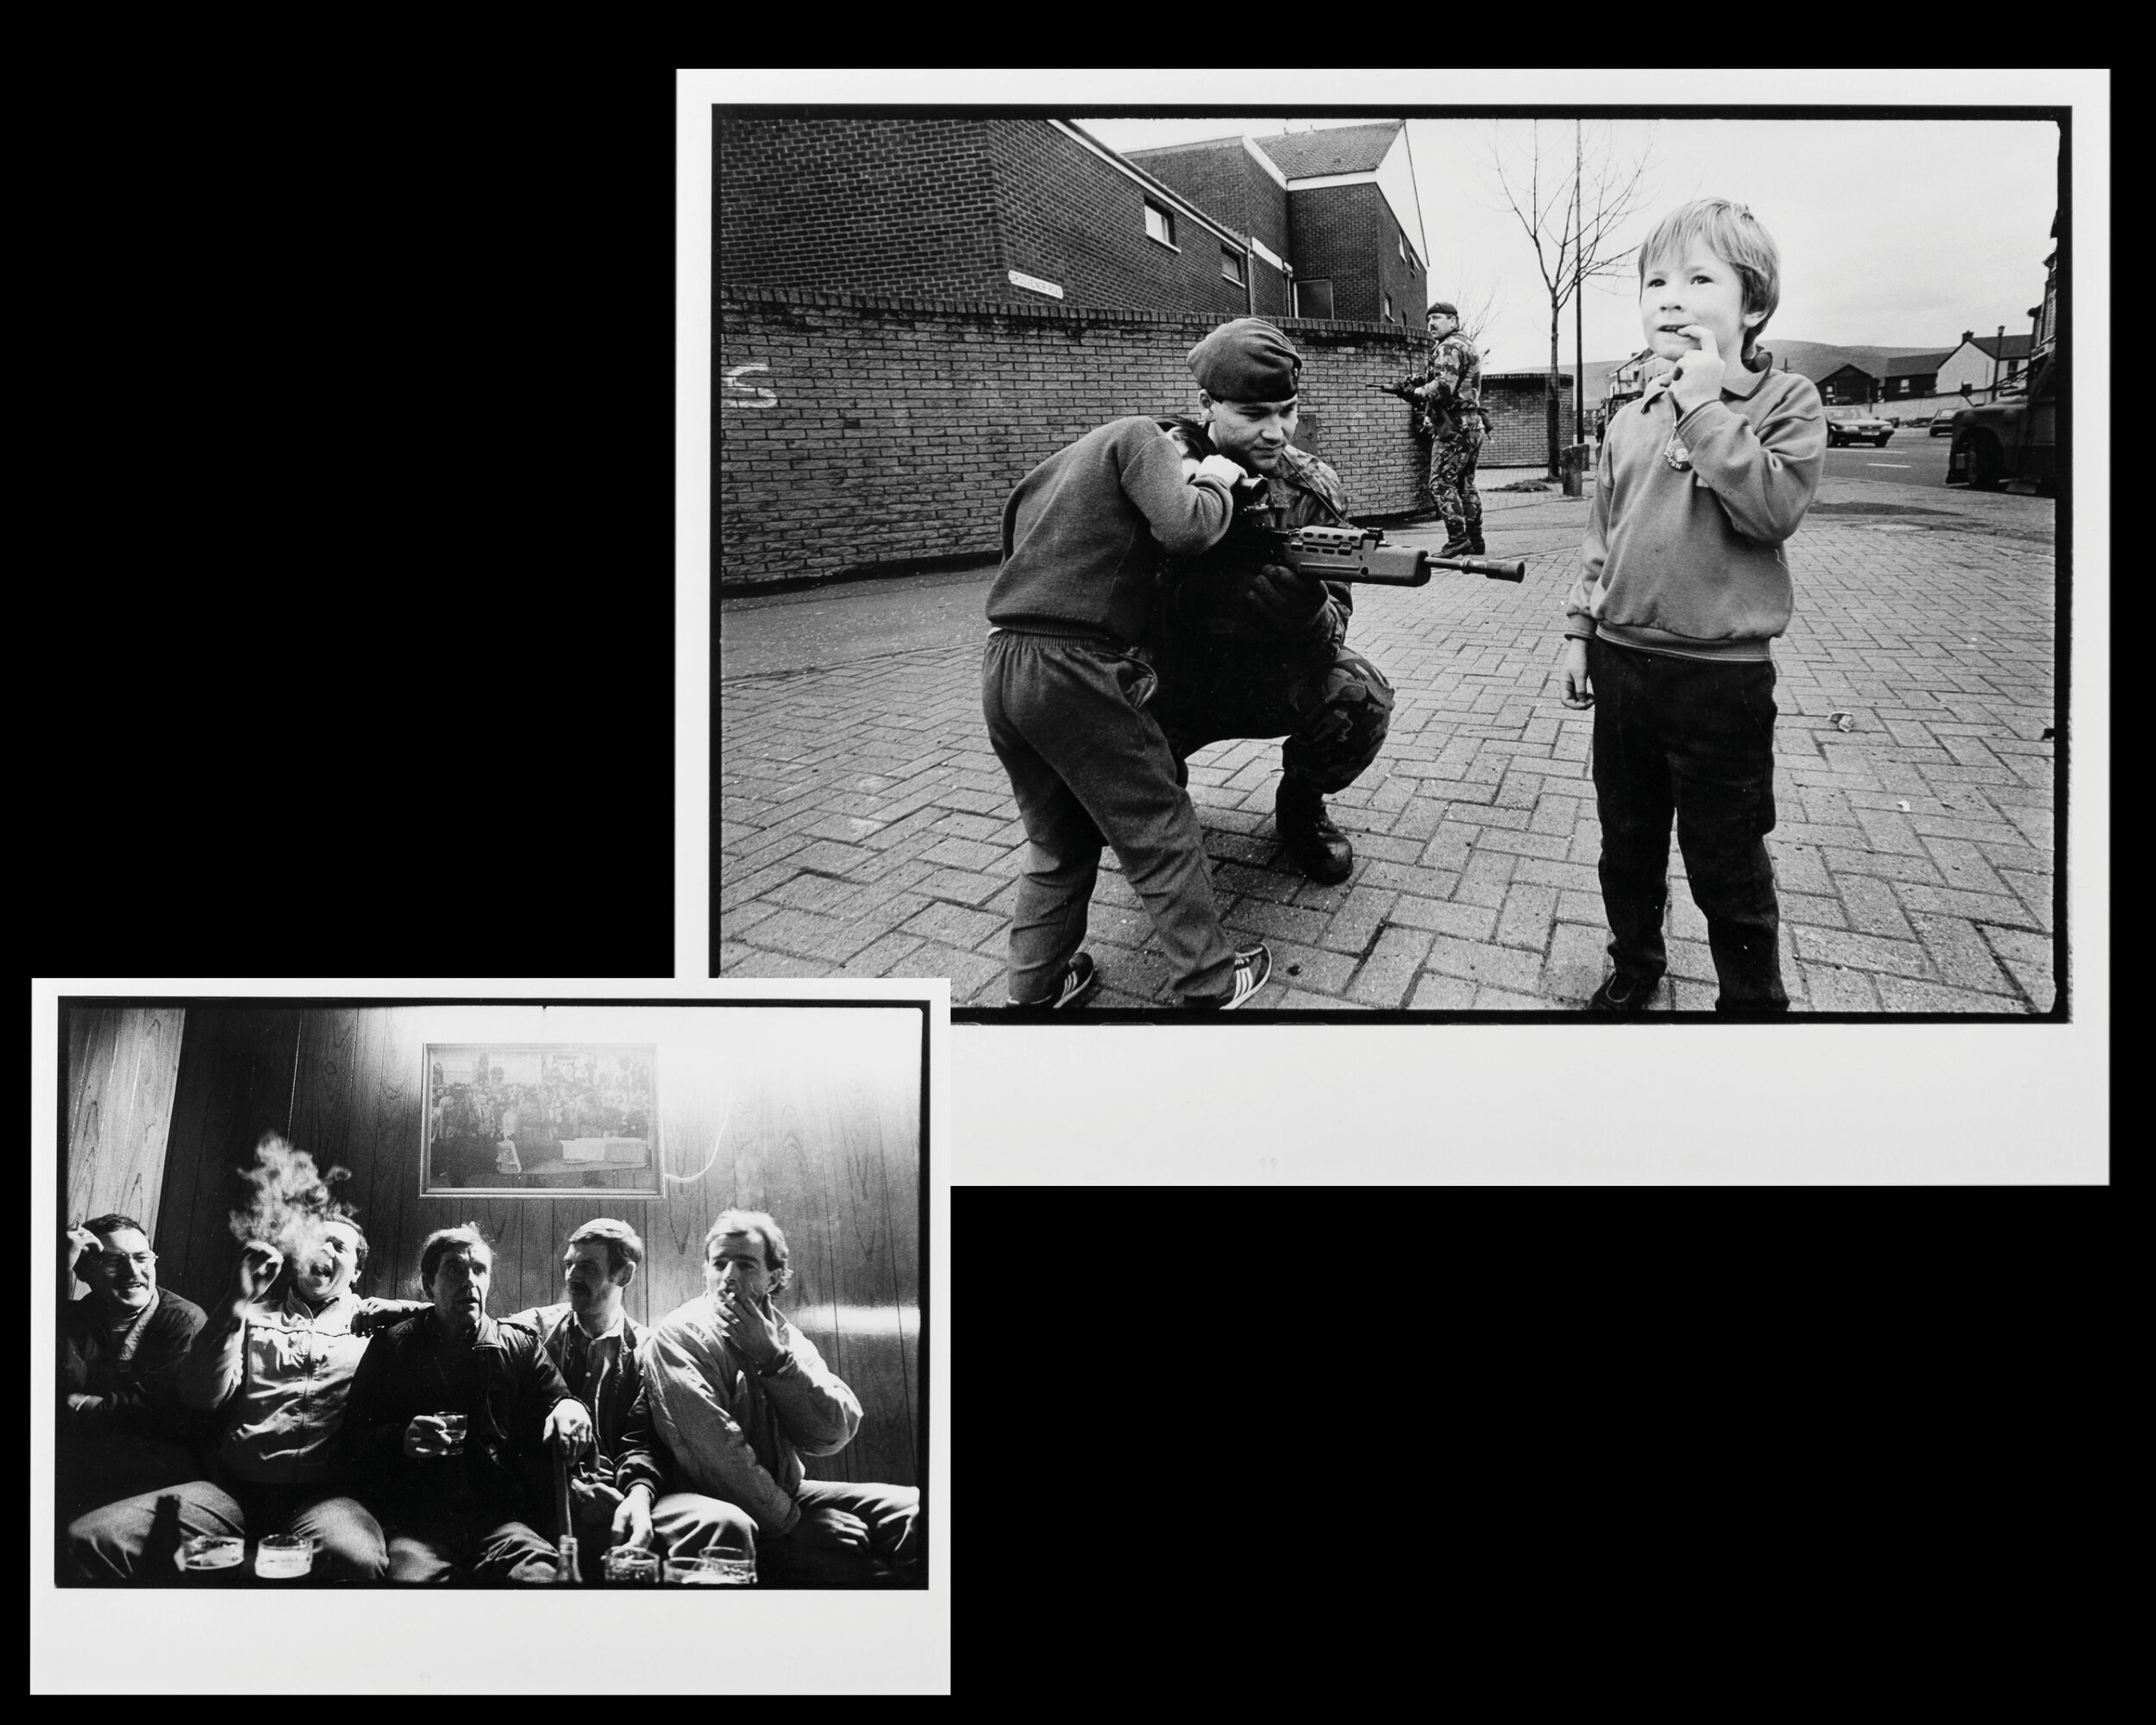  (L) Bar patrons enjoy a drink and a smoke at the Felon's Club, an IRA owned bar for members and ex-prisoners in North Belfast, Northern Ireland. 1988 (R)  A young Catholic boy looks through the rangefinder of a British soldier's gun in Belfast, Nort